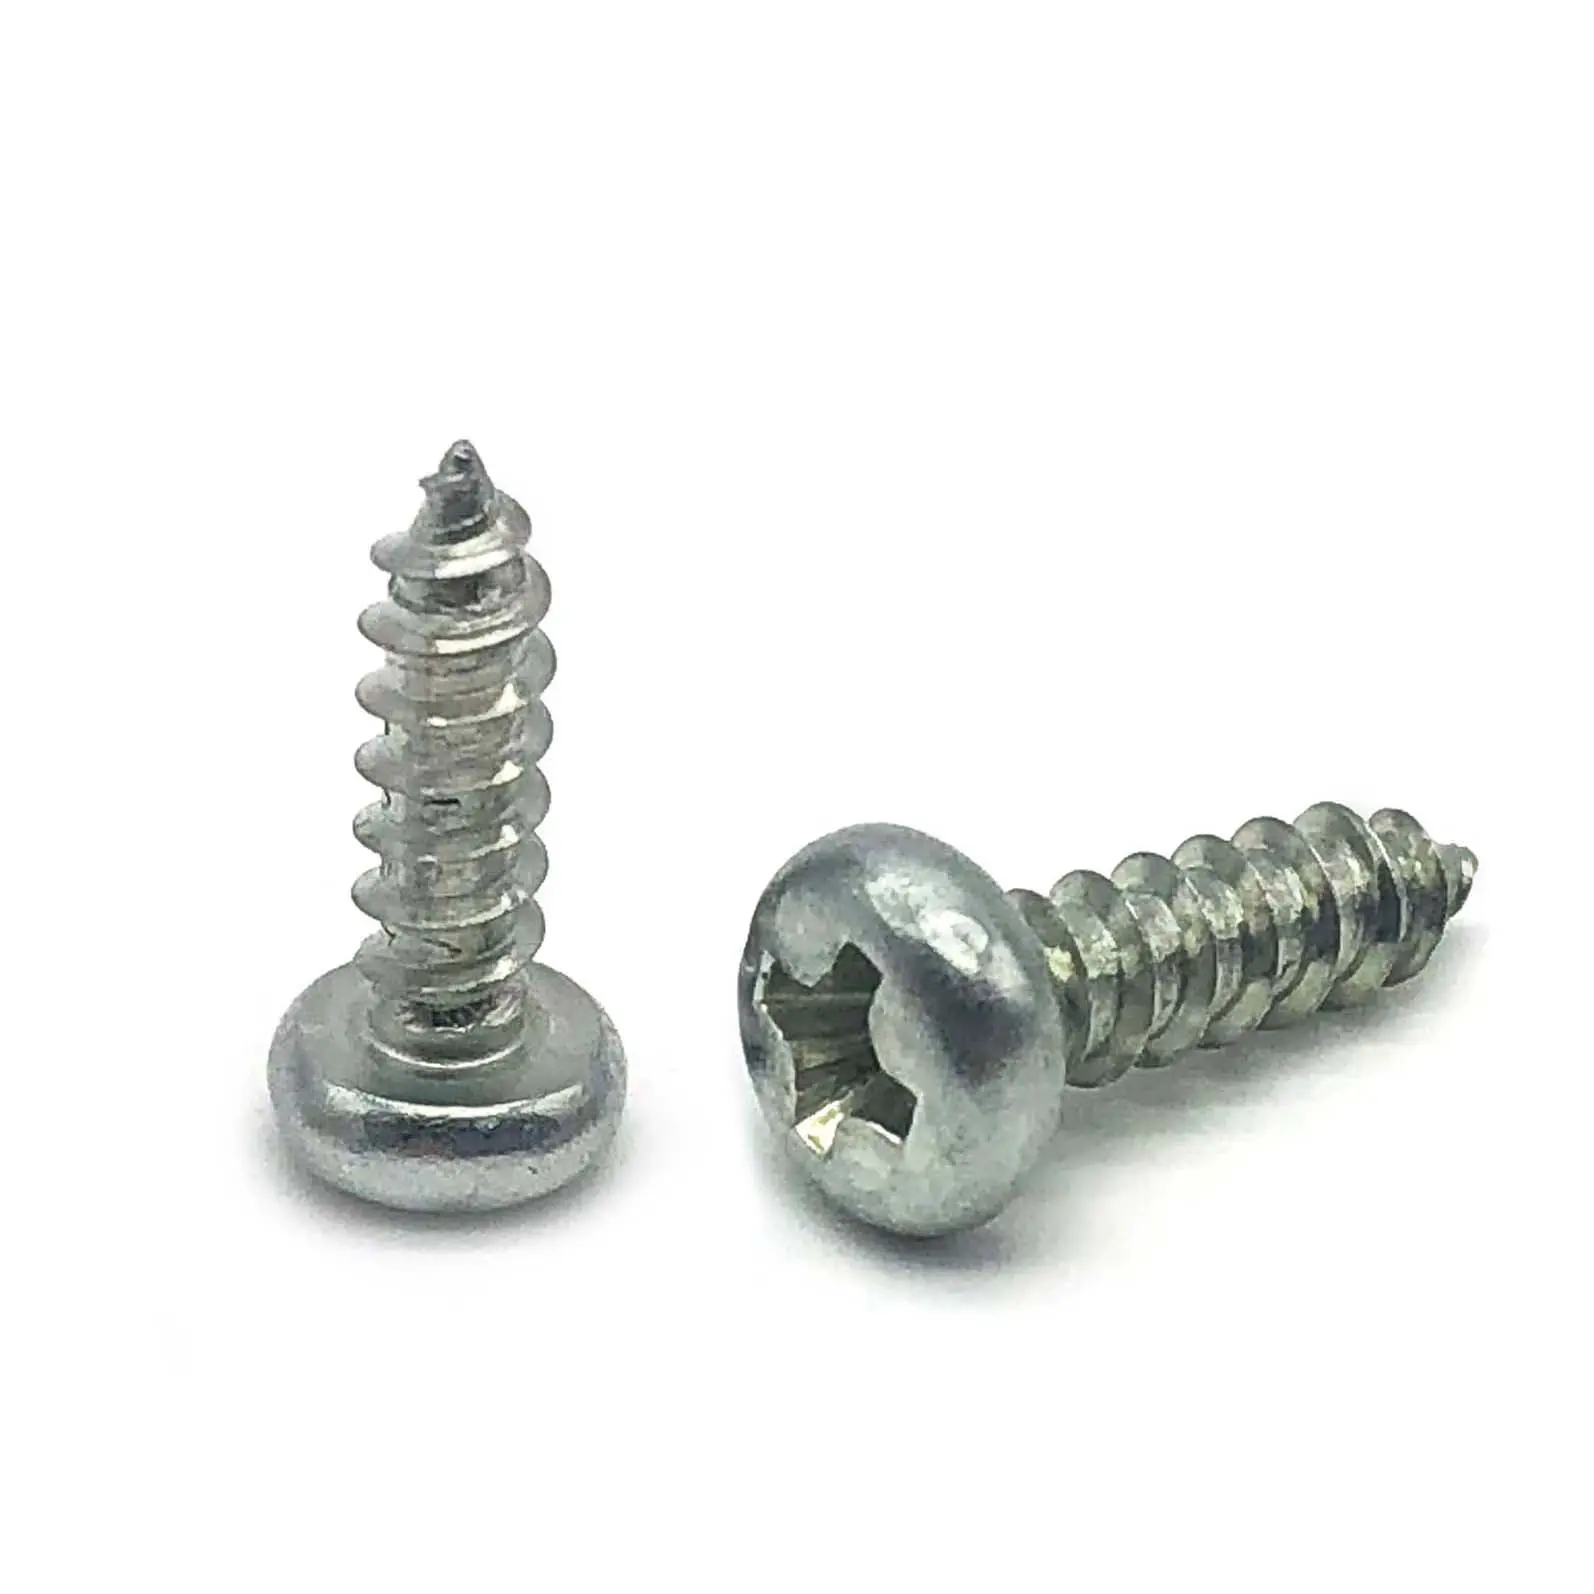 China suppliers wholesale DIN 7981 1/4-20 self-tapping tek screw 1/2 m2.5 m3 m6 m8 M2.9*9.5 4mm m10 Cross Pan Head Tapping Screw